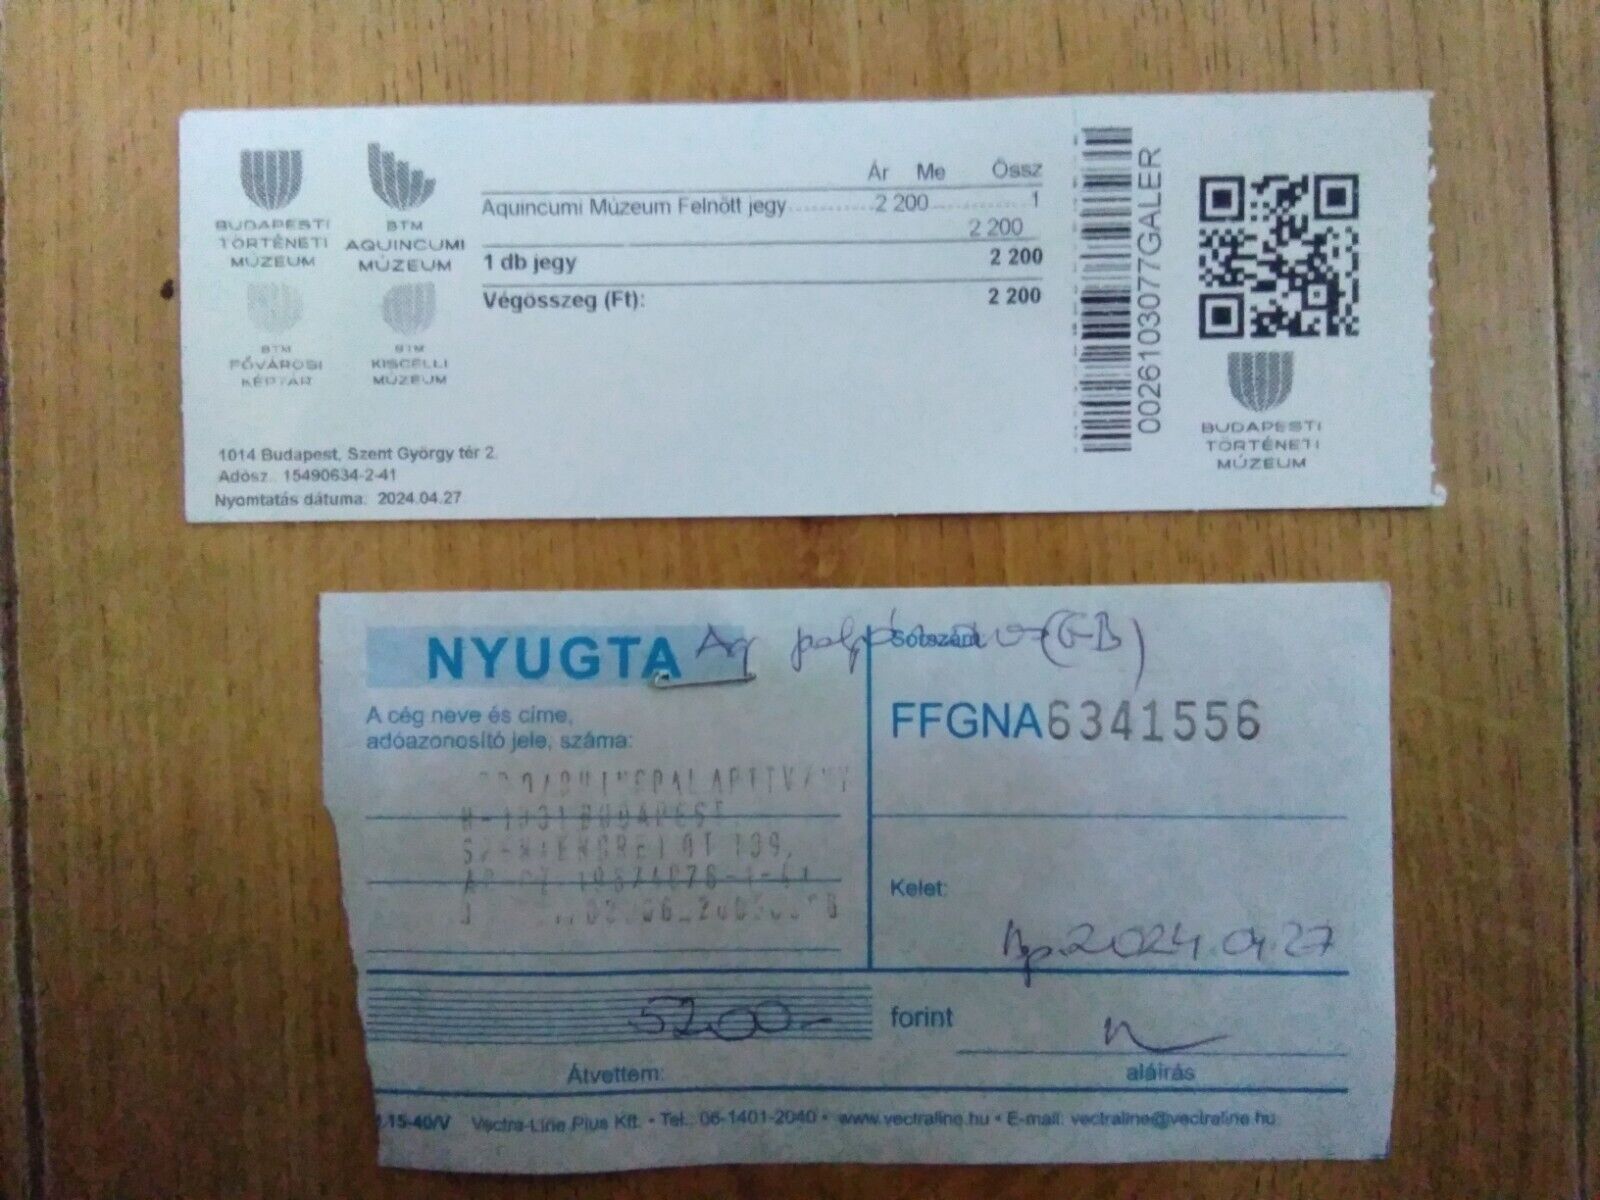 Hungary Budapest Aquincum Roman town archaeological site entry ticket April 2024